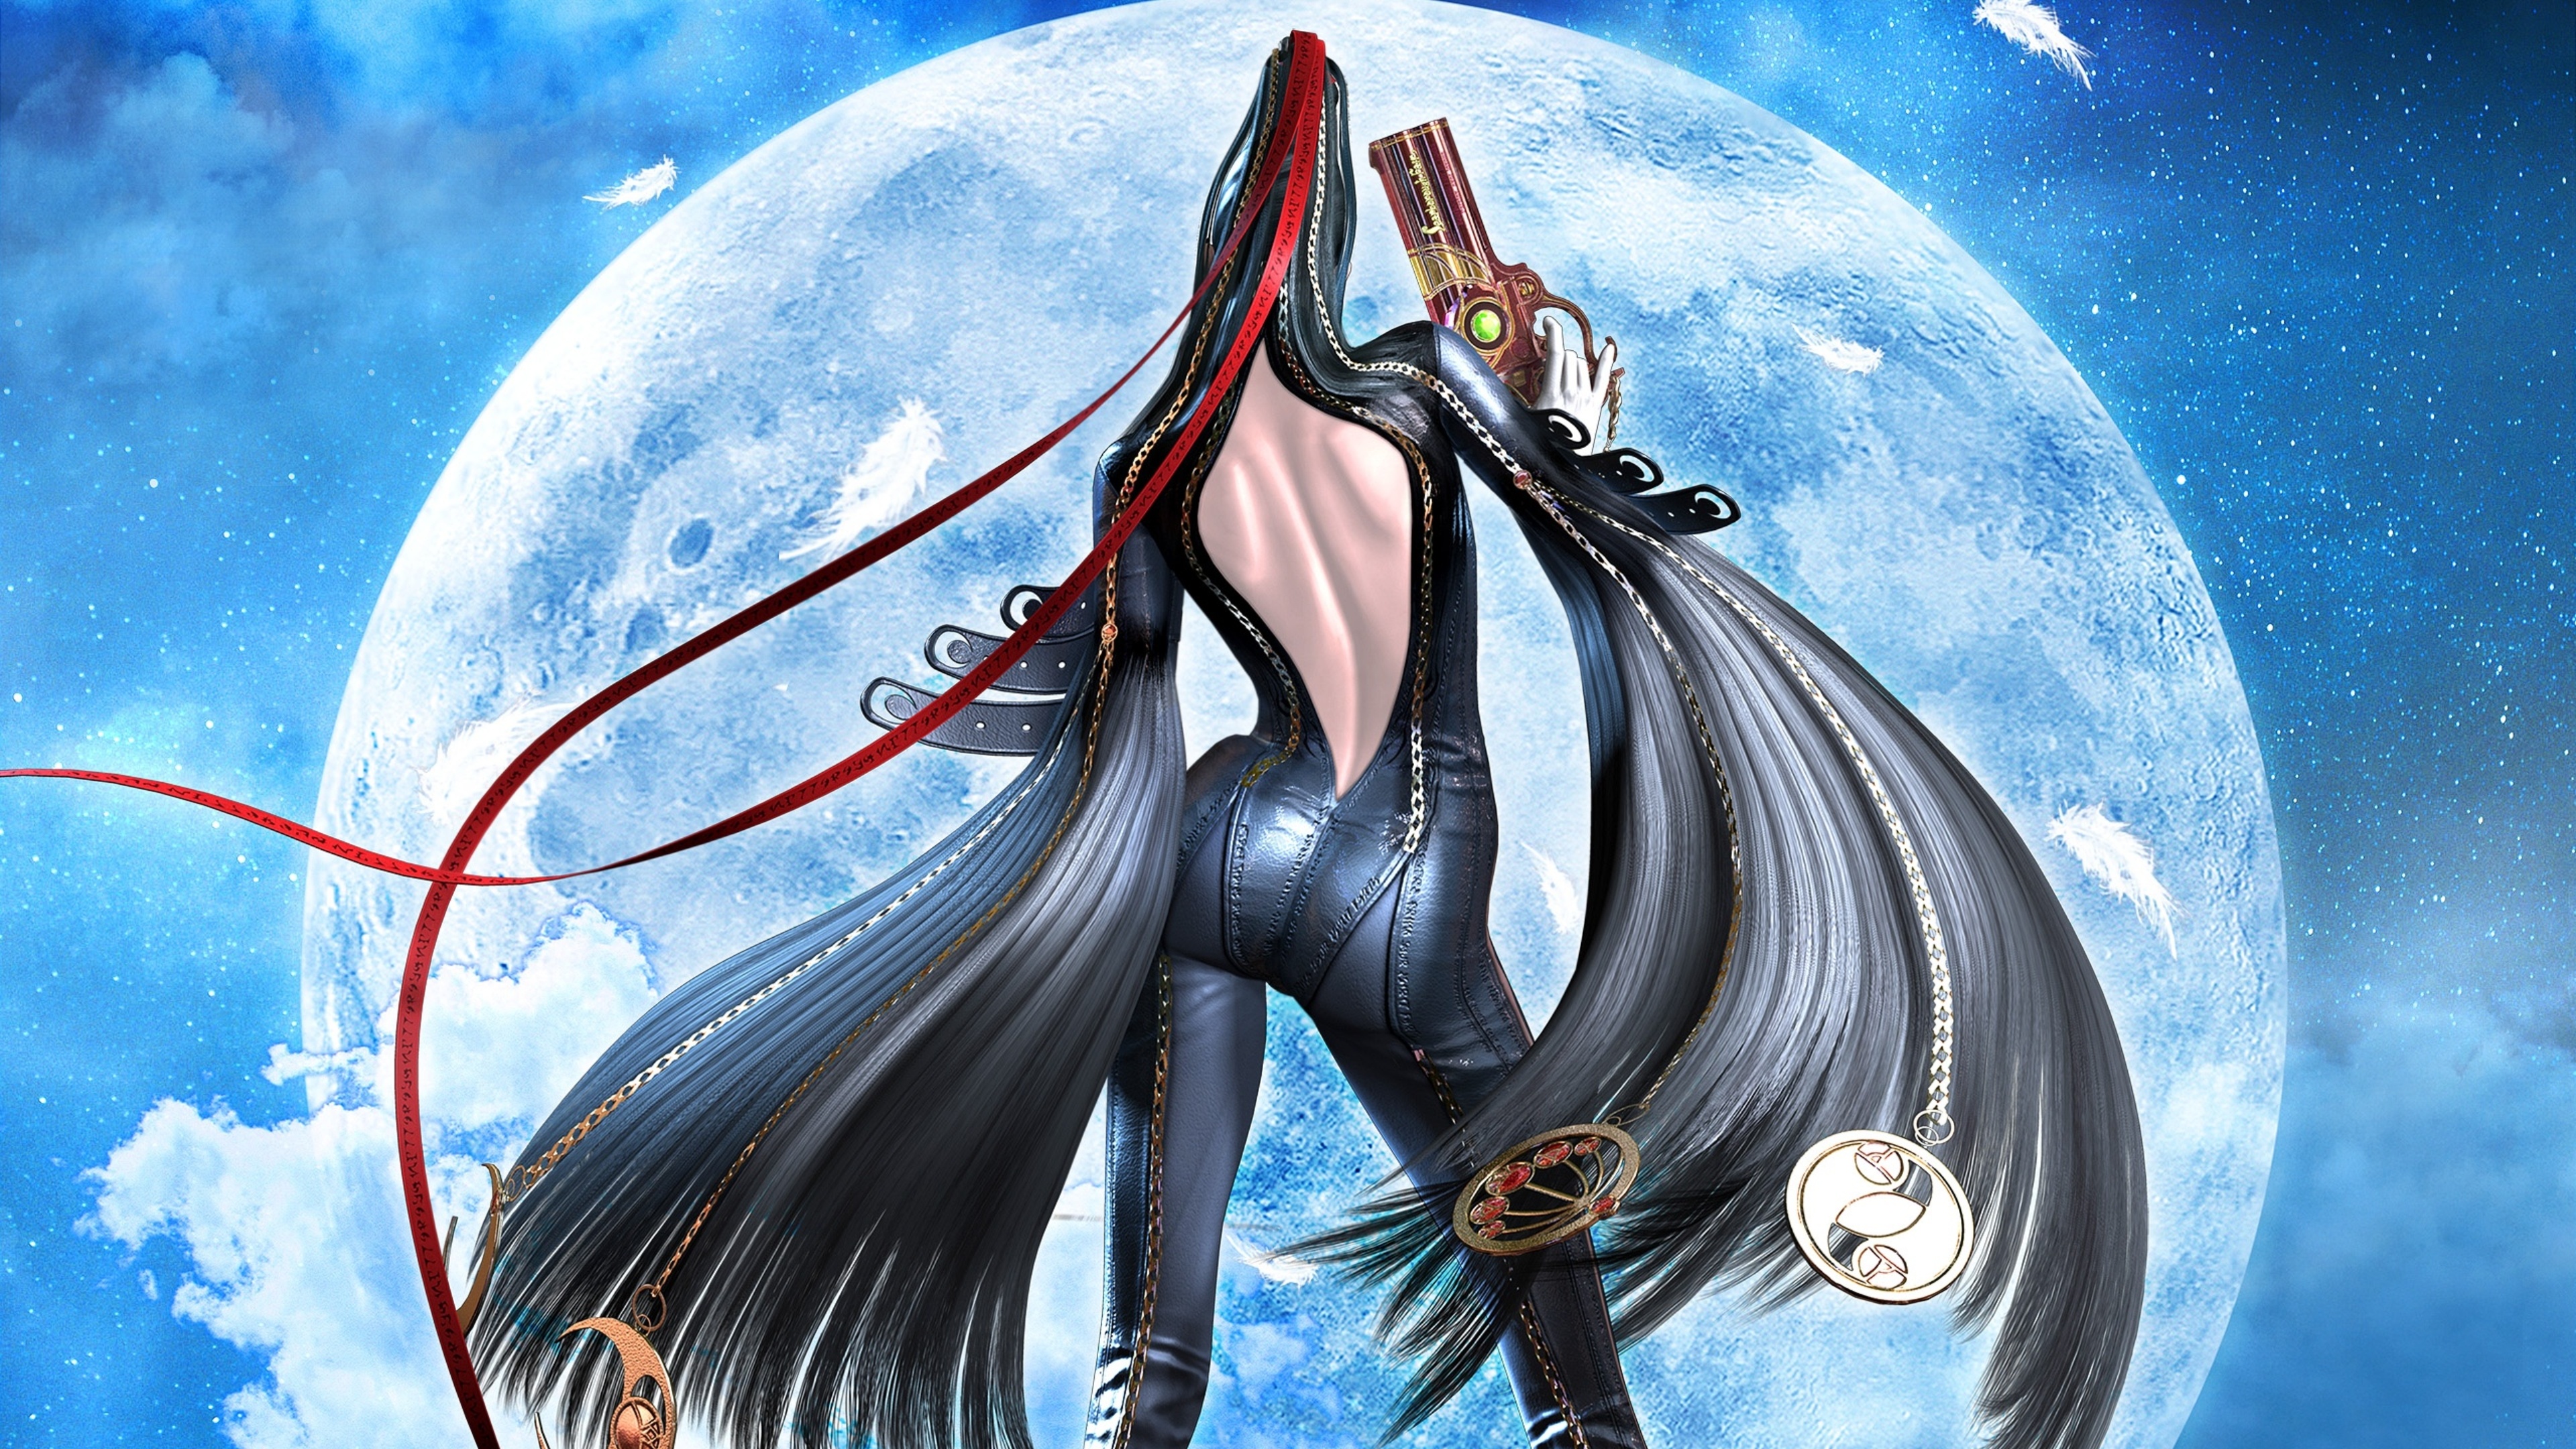 Bayonetta 3: Published by Nintendo, The third installment of the series. 3840x2160 4K Wallpaper.